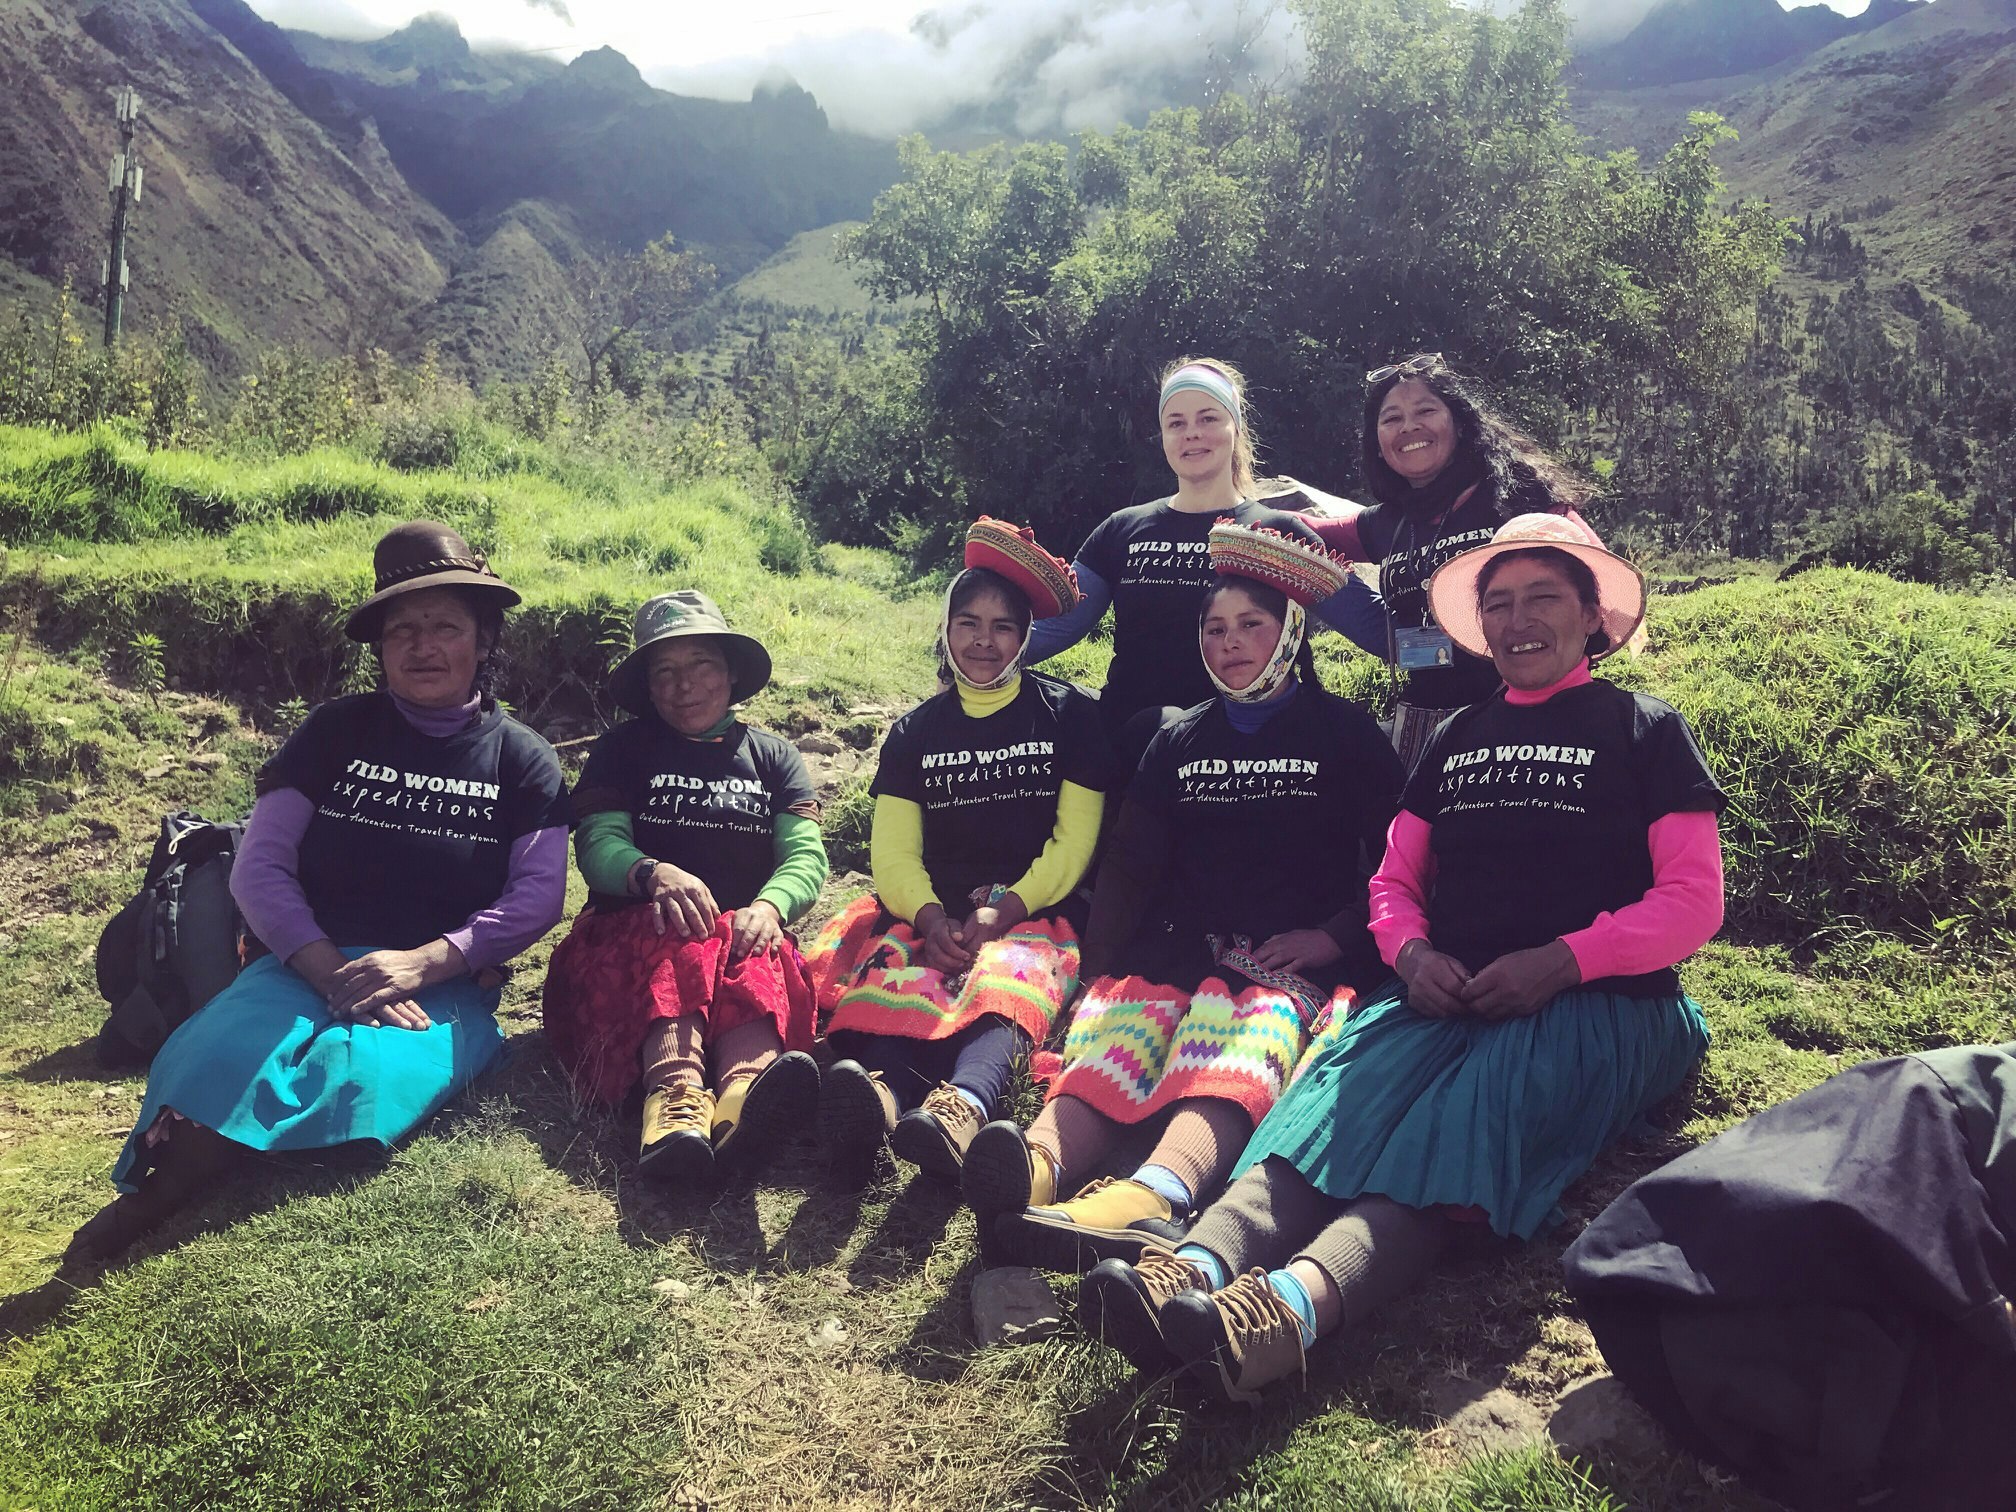 A group of female porters in Peru pose for the camera on a grassy hill along the Inca Trail. They are wearing black shirts that say 'Wild Women Expeditions' over their long skirts and long-sleeve shirts; women adventure travel 